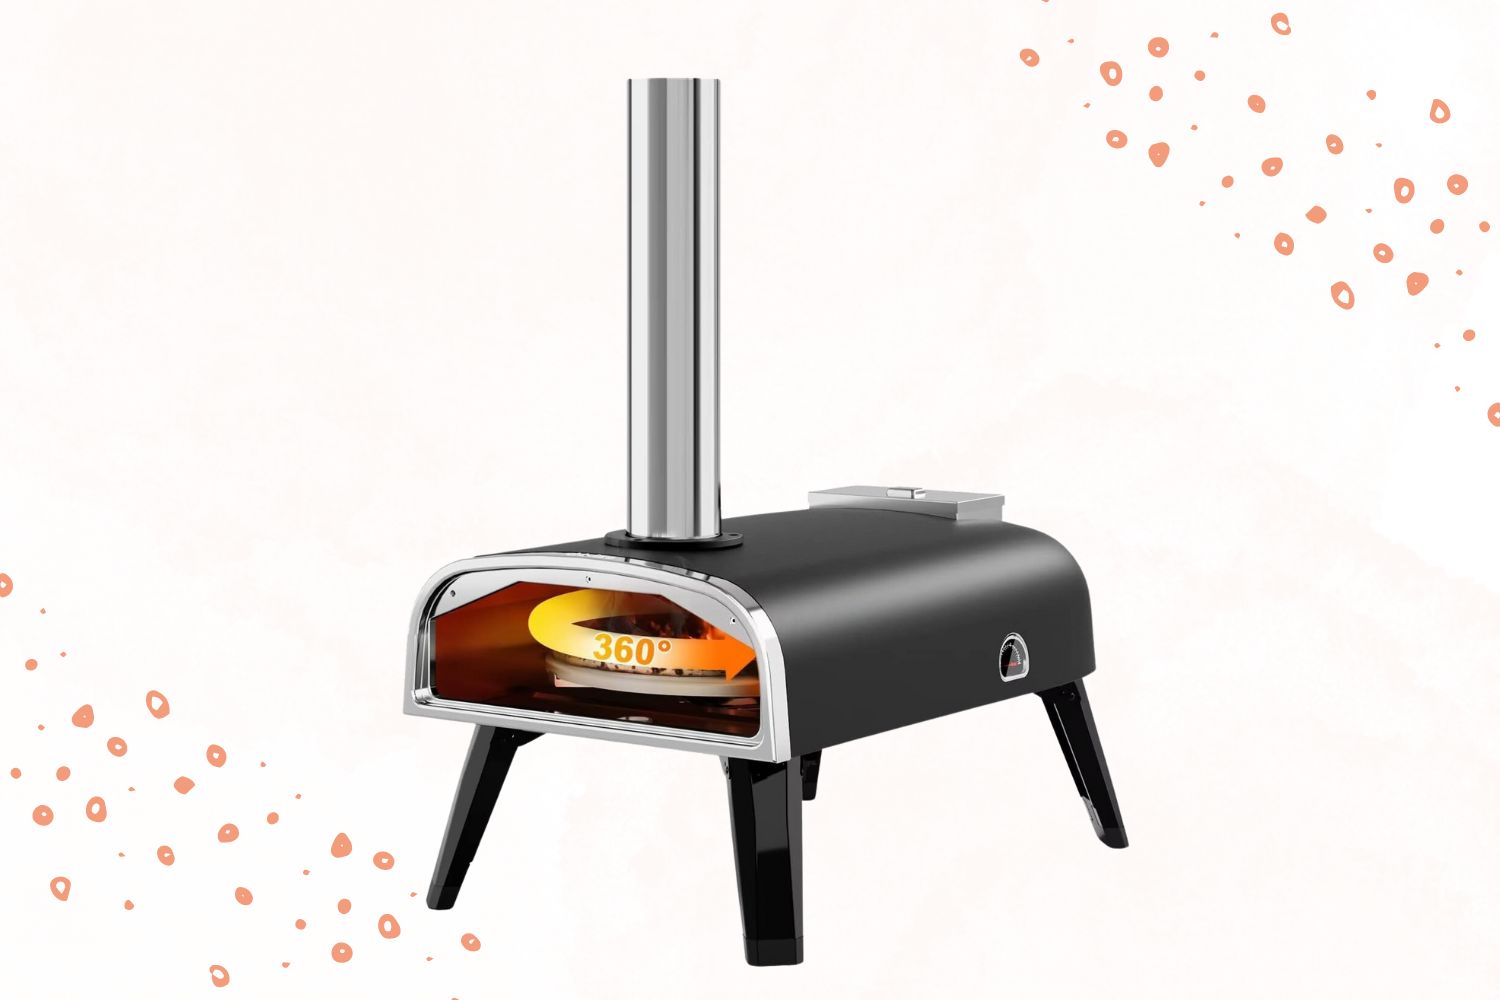 Outdoor Pizza Oven Aidpiza 12" Wood Pellet Pizza Ovens with Rotatable Round Pizza Stone